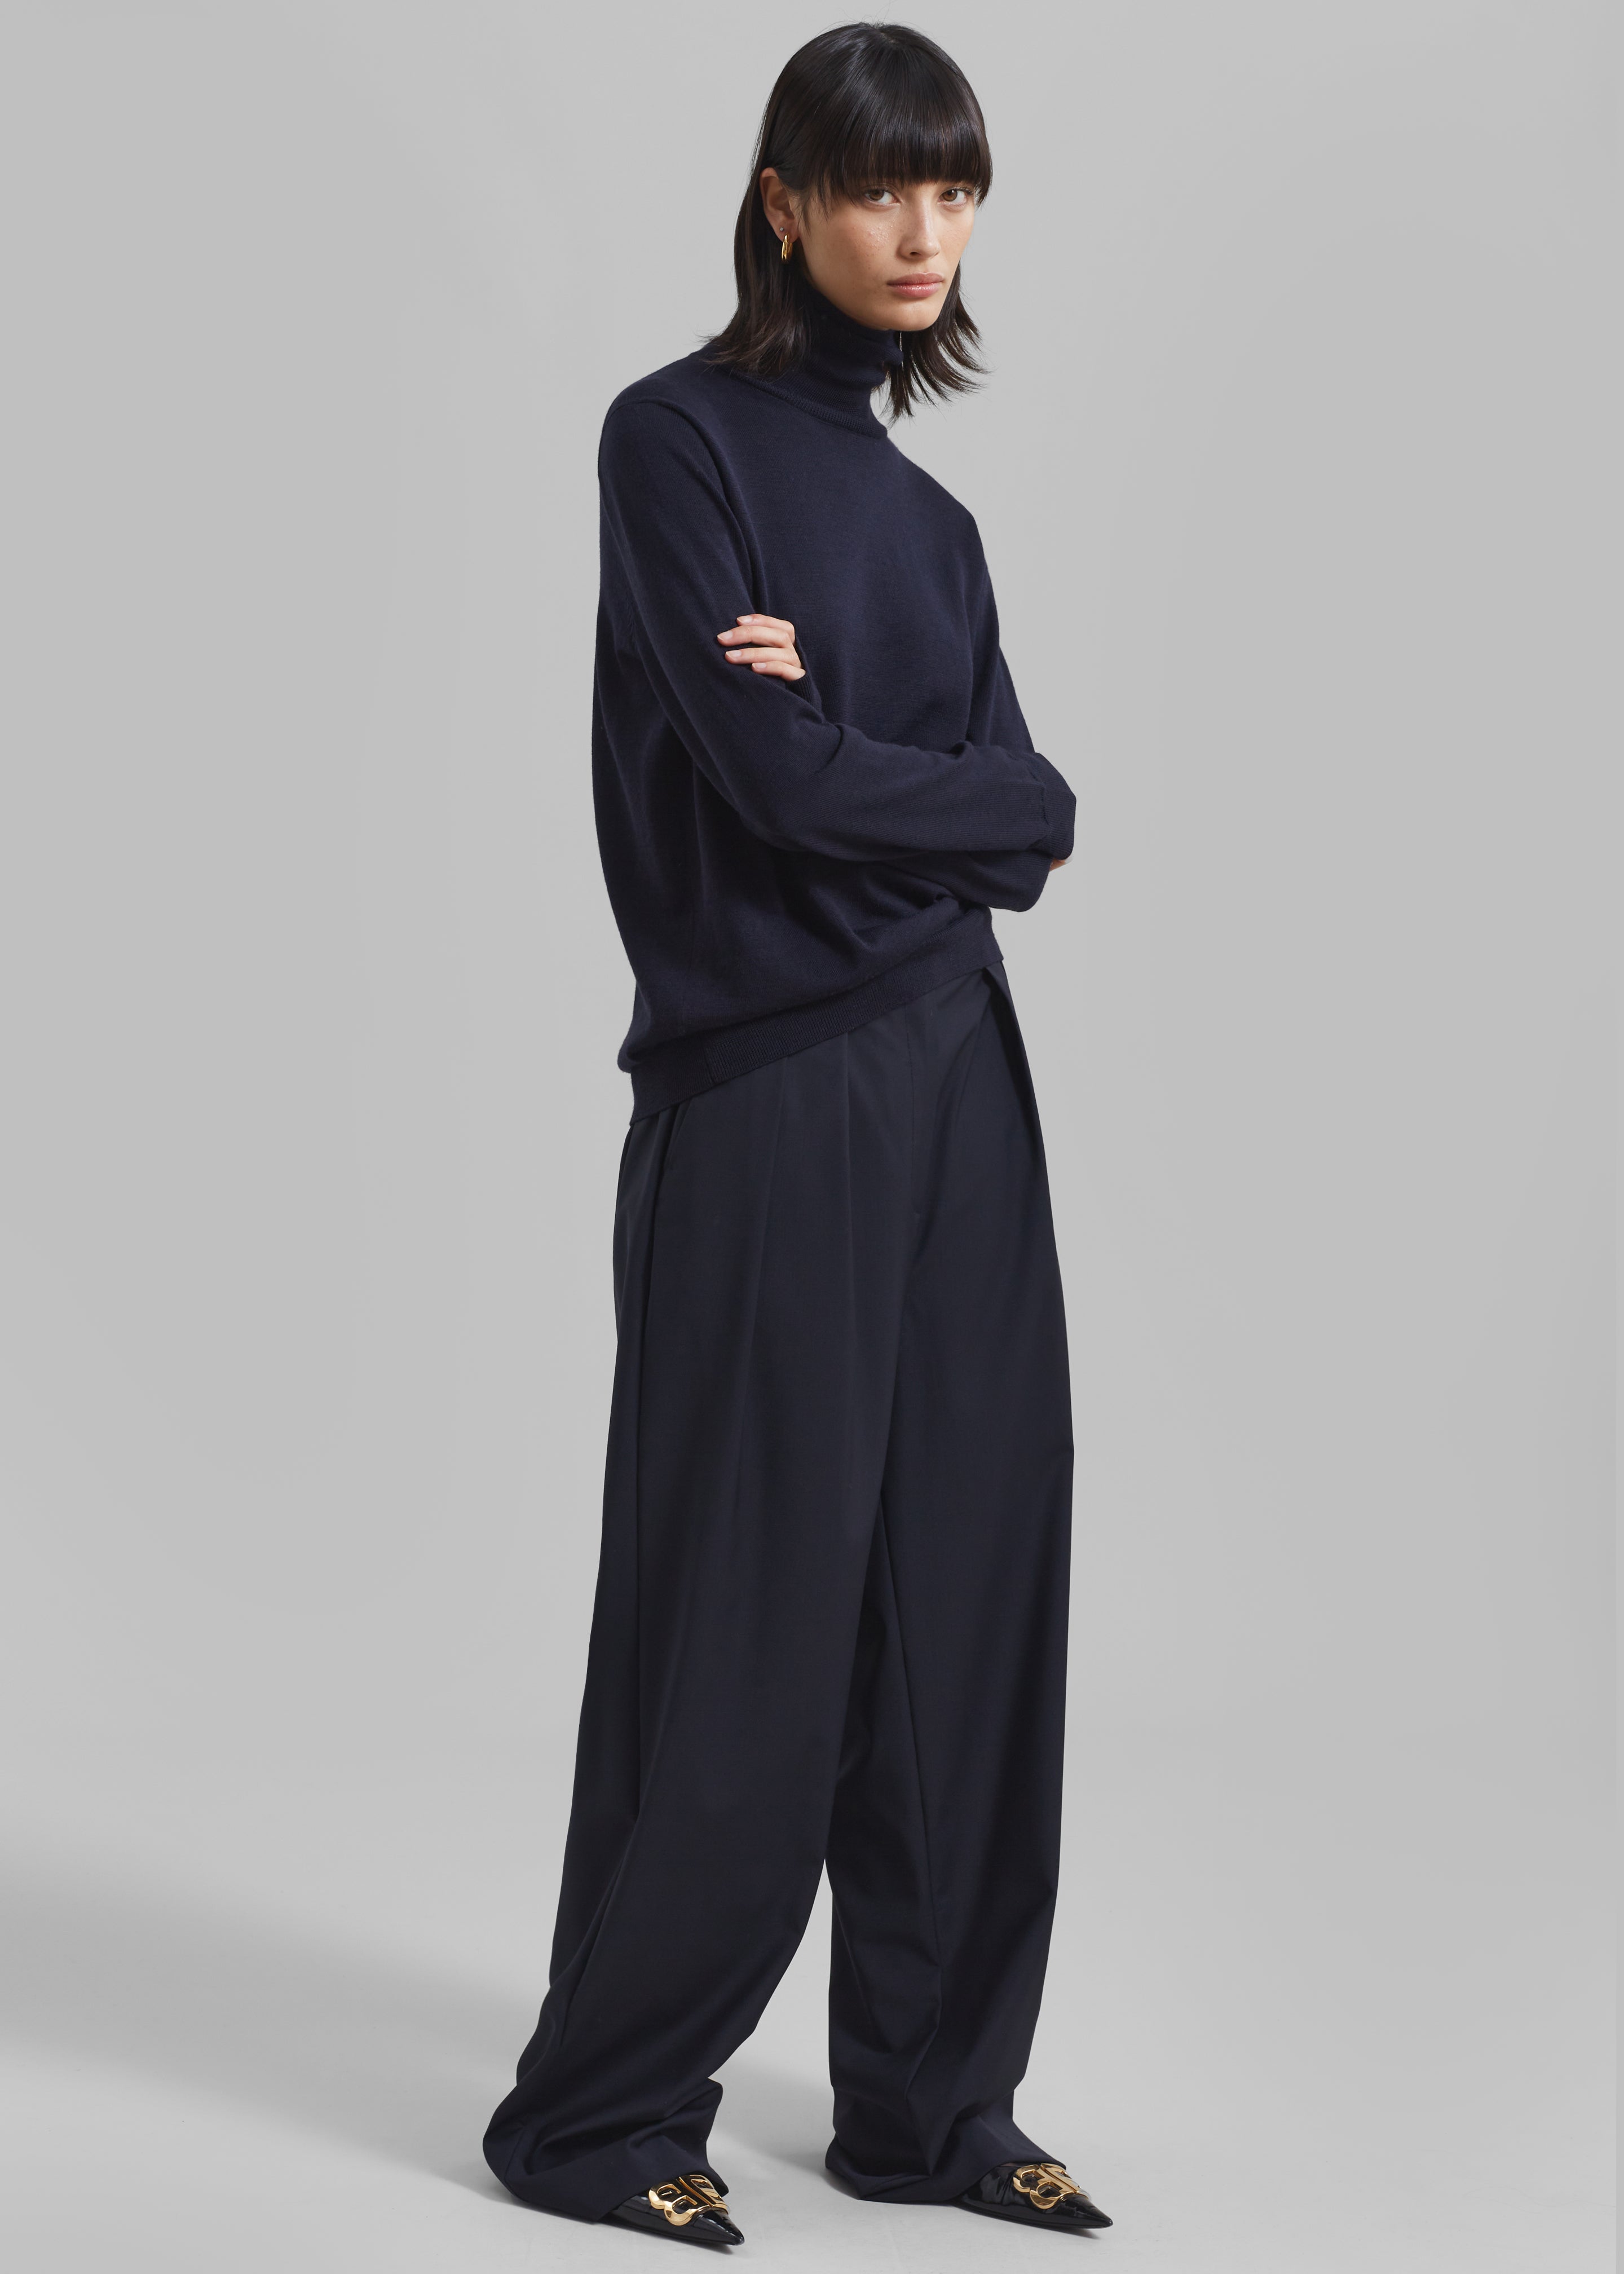 Ripley Pleated Trousers - Navy - 3